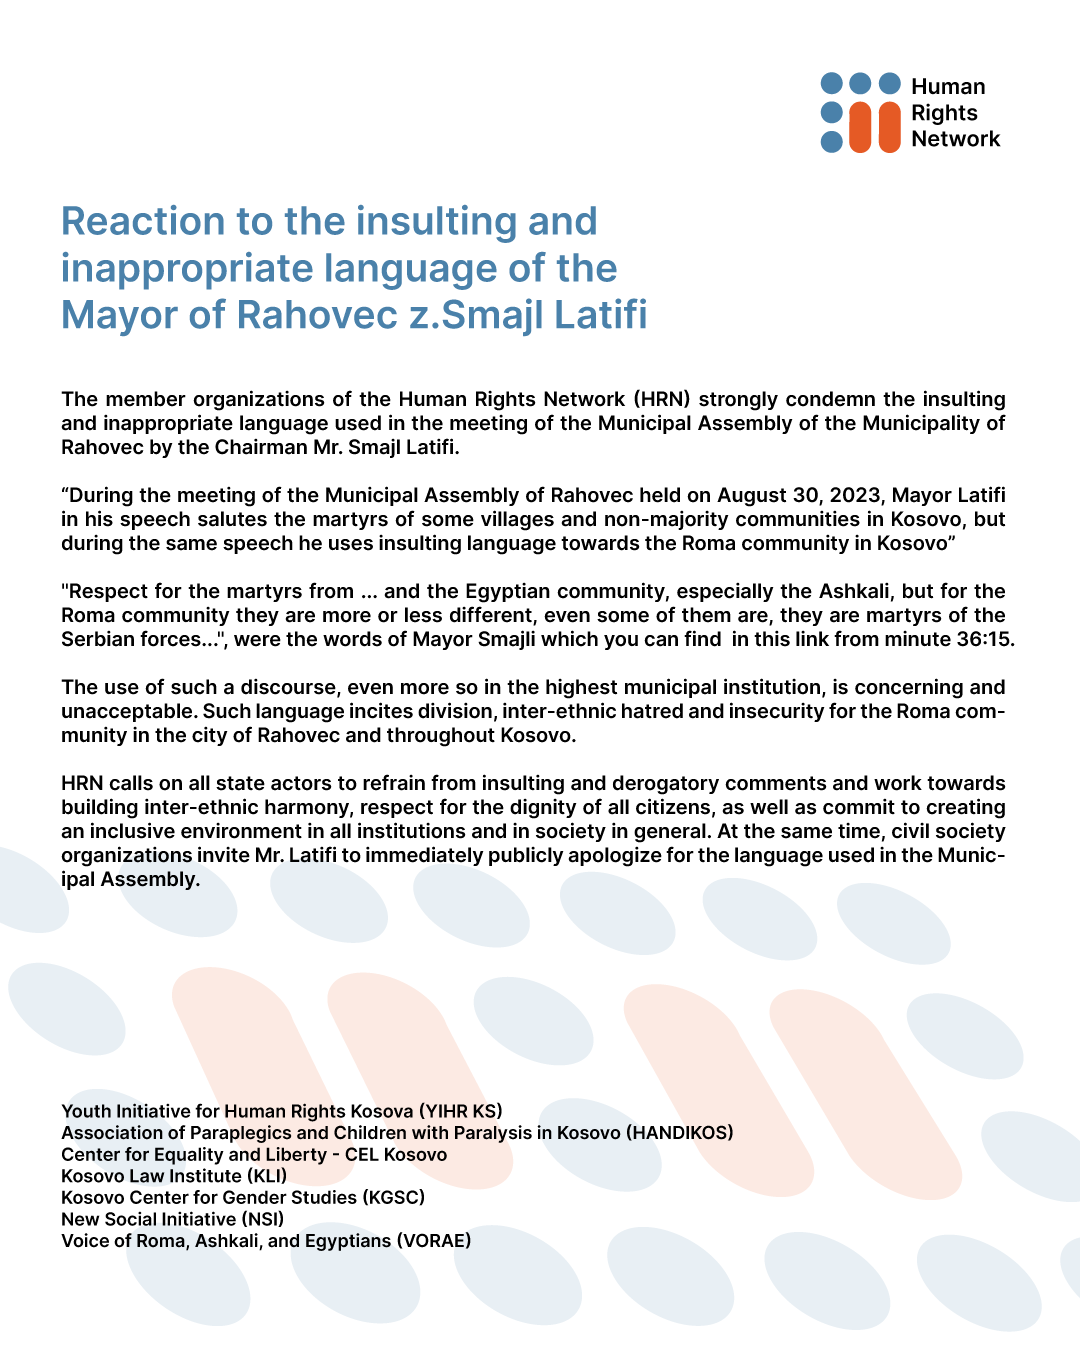 Reaction to the insulting and inappropriate language of the Mayor of Rahovec z.Smajl Latifi